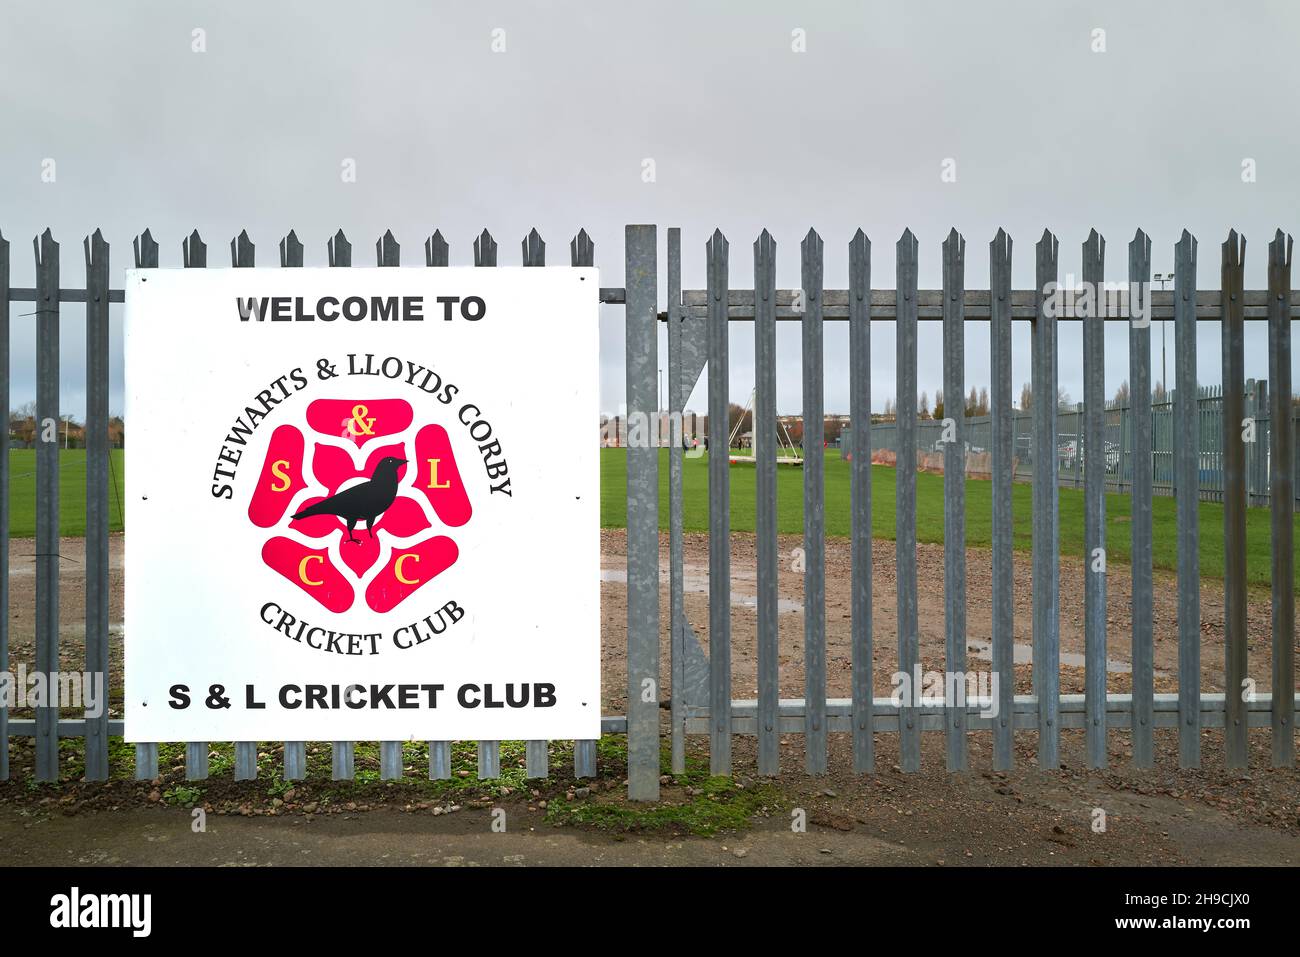 Welcome sign to Stewarts & LLoyds cricket club, Corby, England. Stock Photo